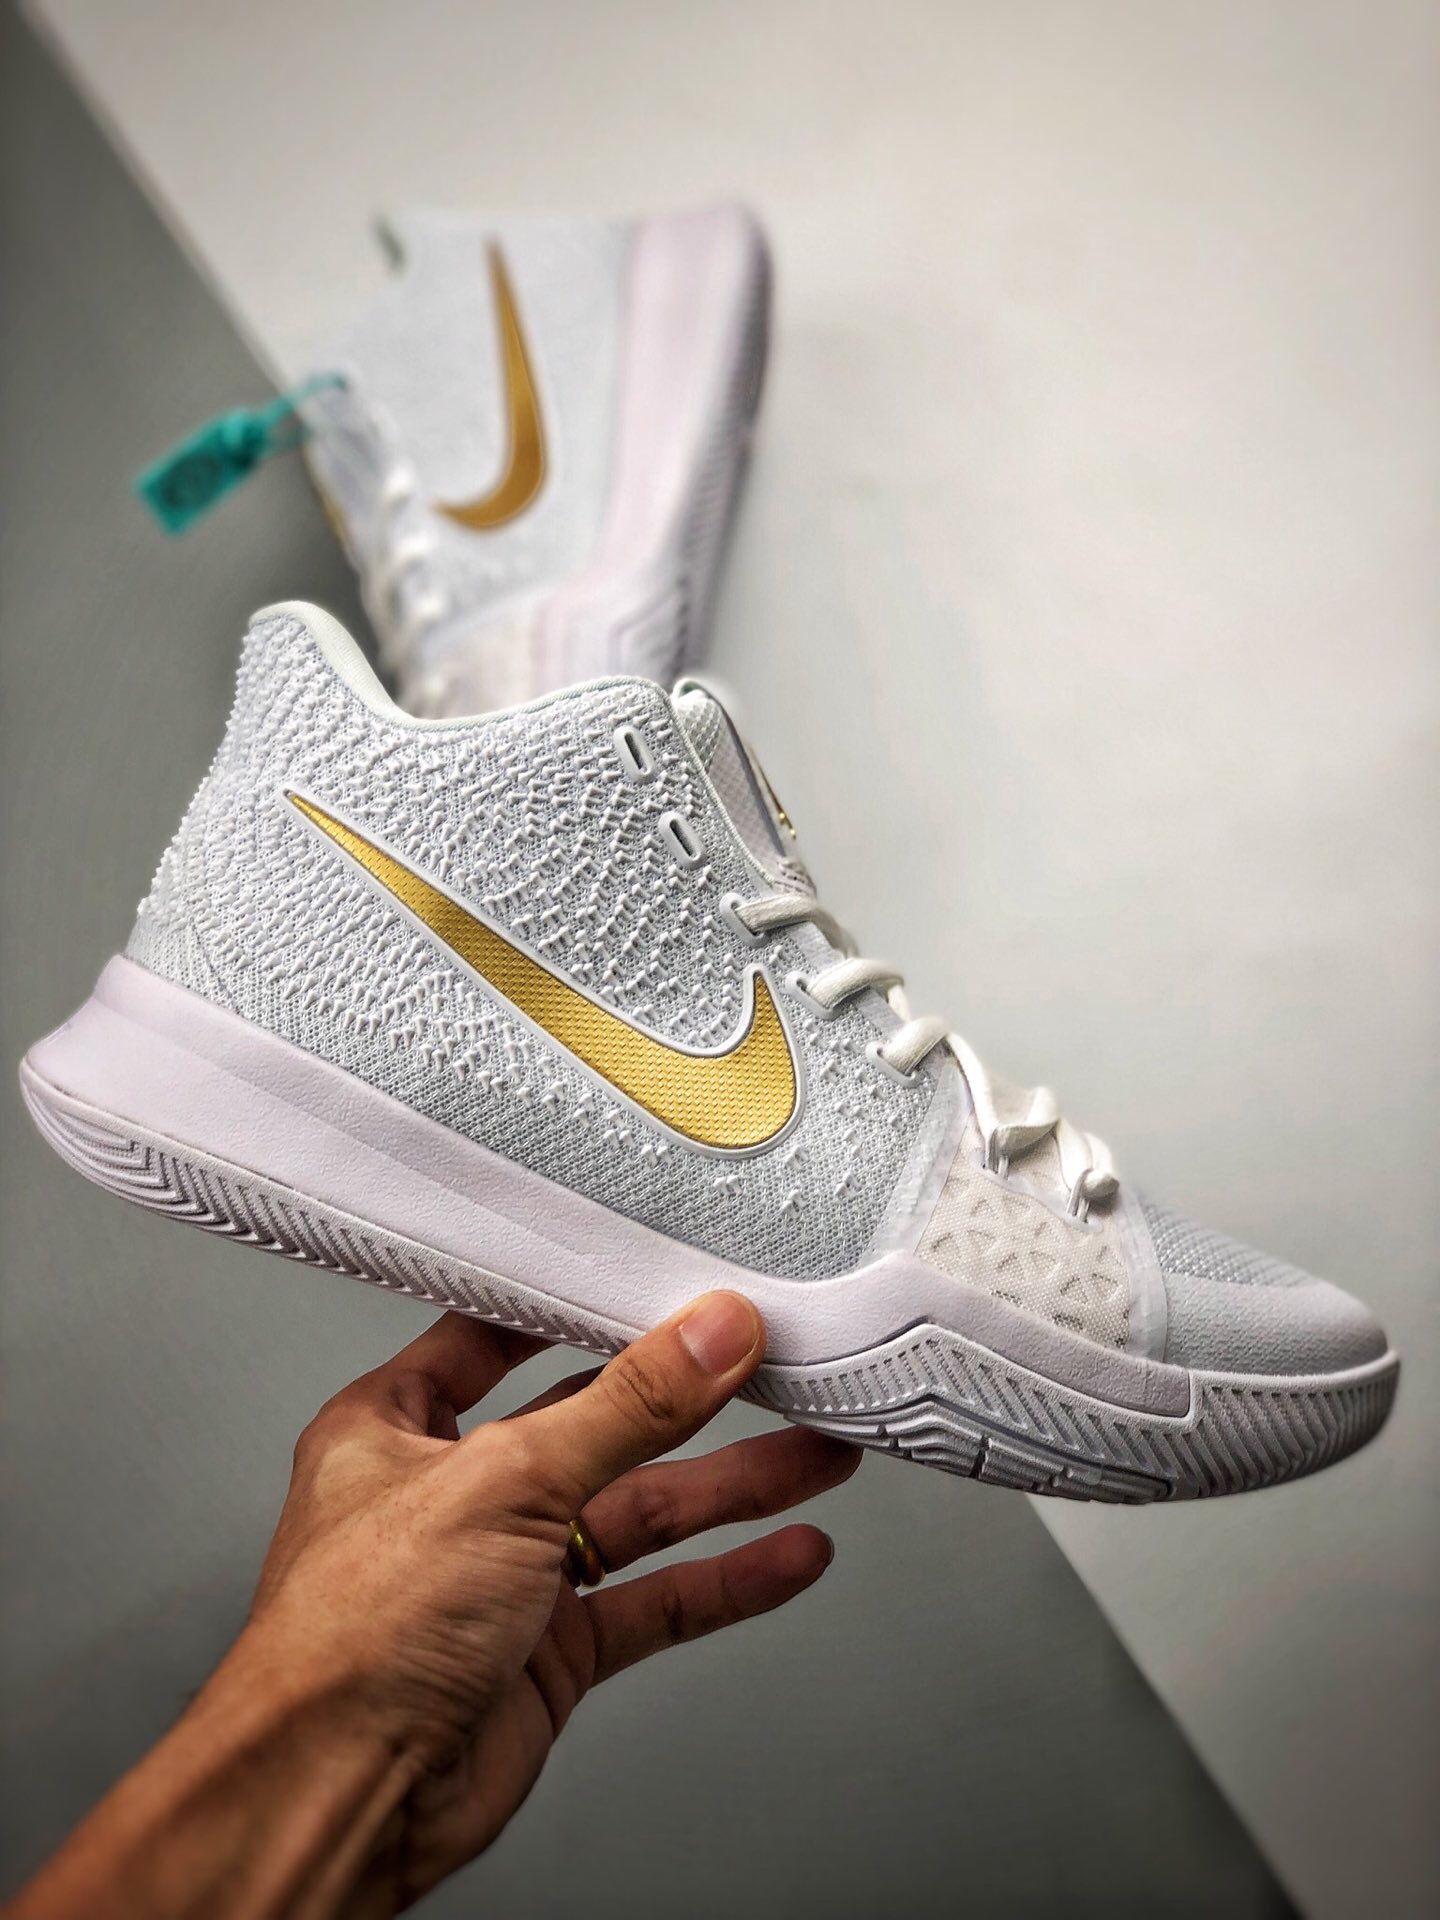 kyrie 3 shoes gold